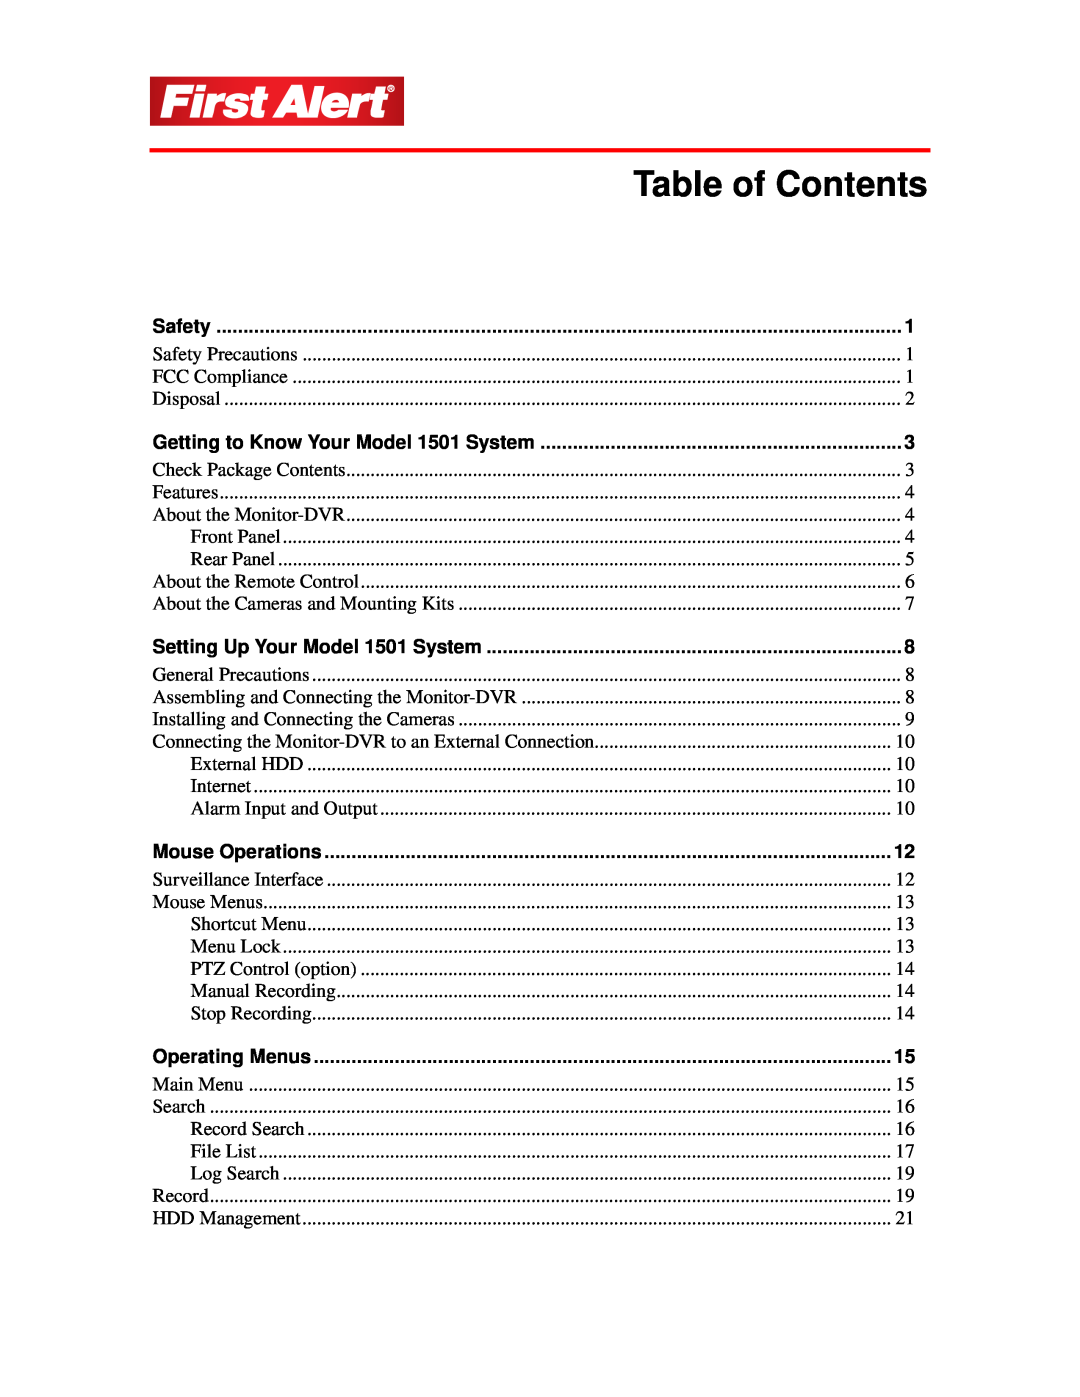 First Alert 1501 user manual Table of Contents, Safety, Mouse Operations, Operating Menus 